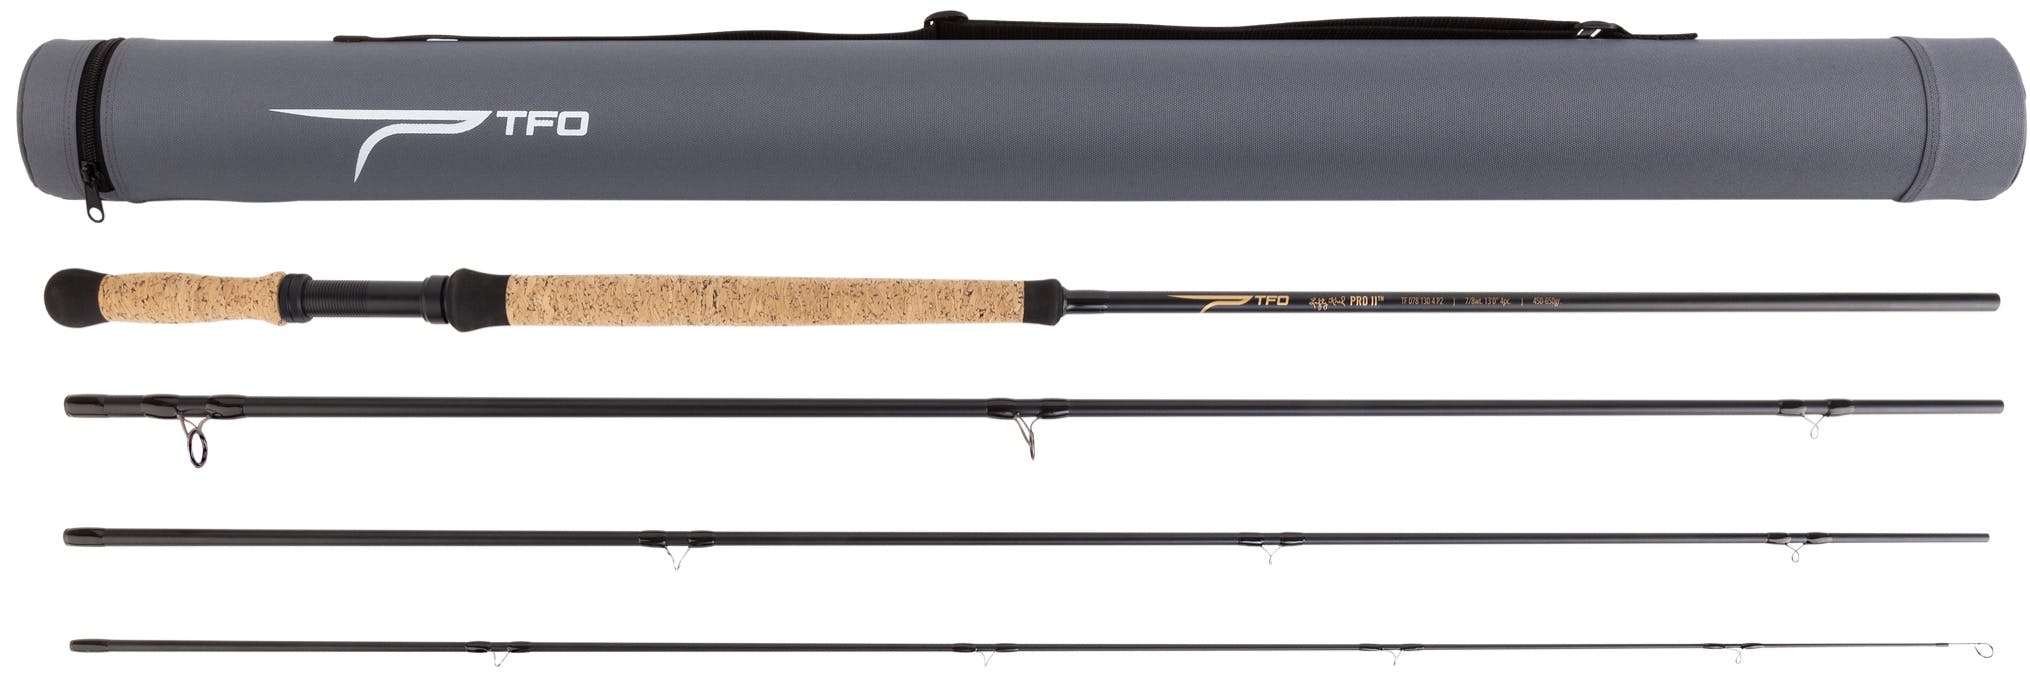 Temple Fork Outfitters Pro 2 Two-Handed Fly Rod